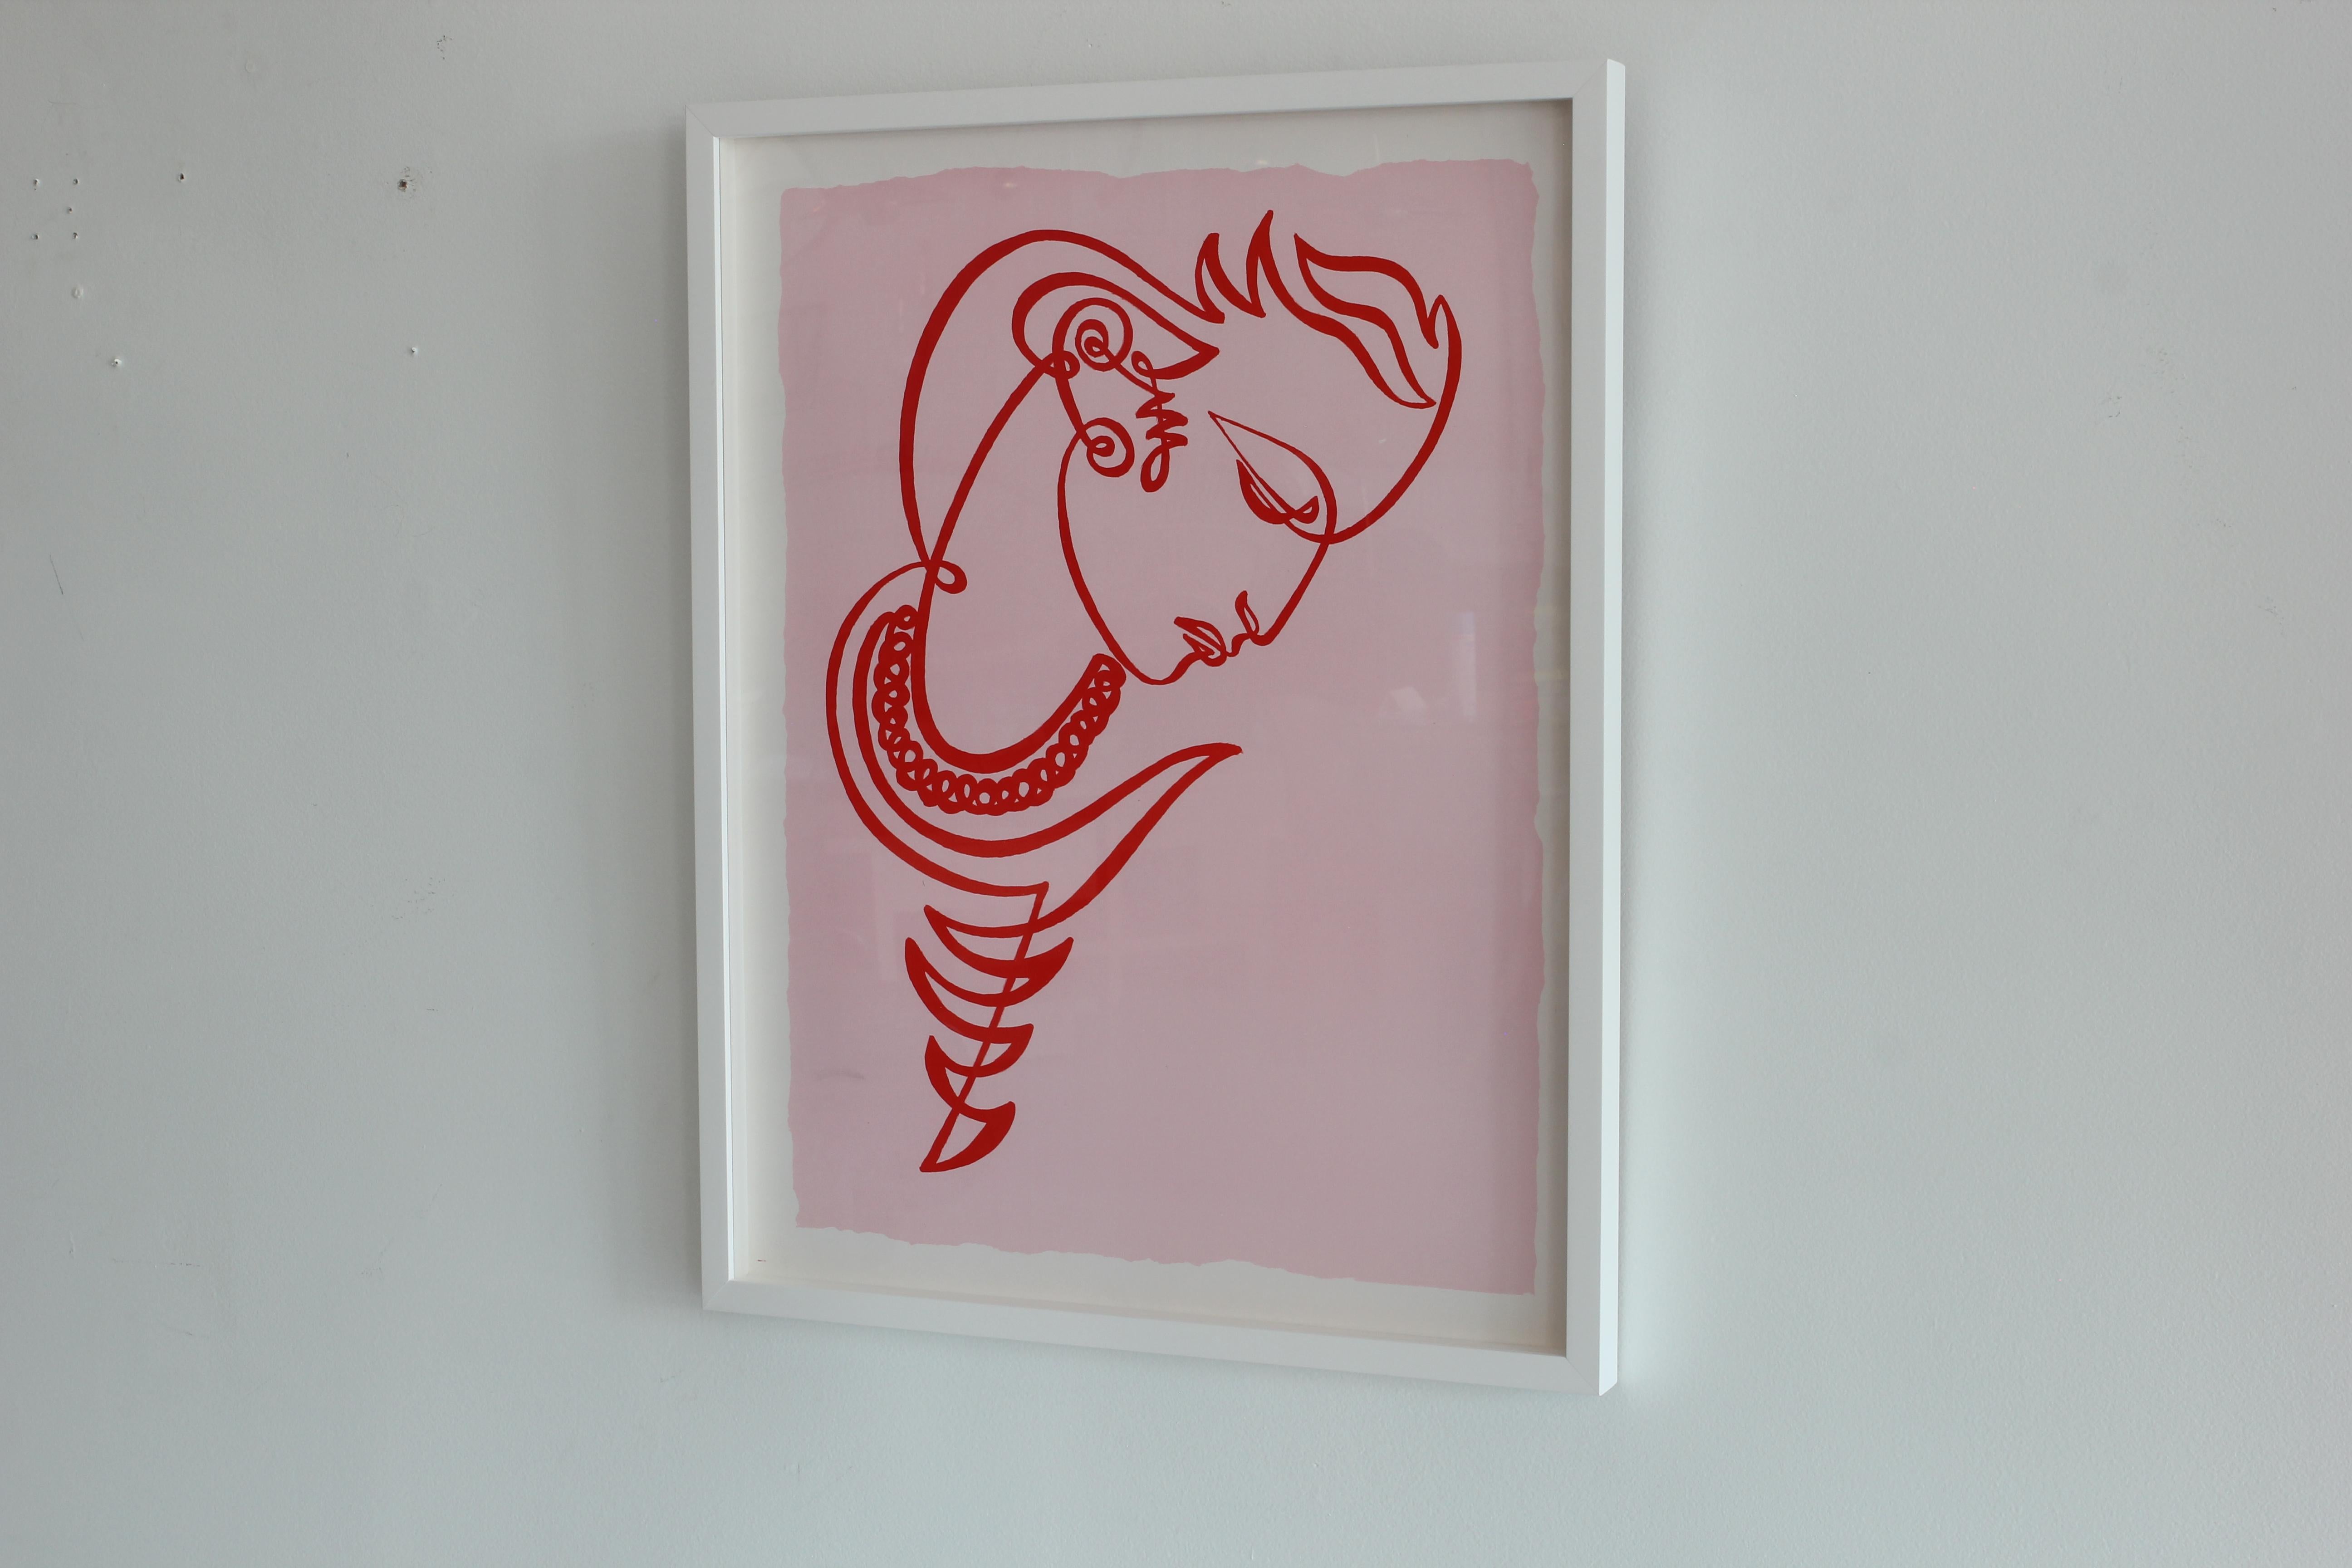 Beautiful continuous line drawing by Jean Negulesco-Oscar award winning Hollywood director. New custom frame. Very rare vintage color serigraph print with blind stamp in corner.

Available in the following variations: 
White frame, pink background